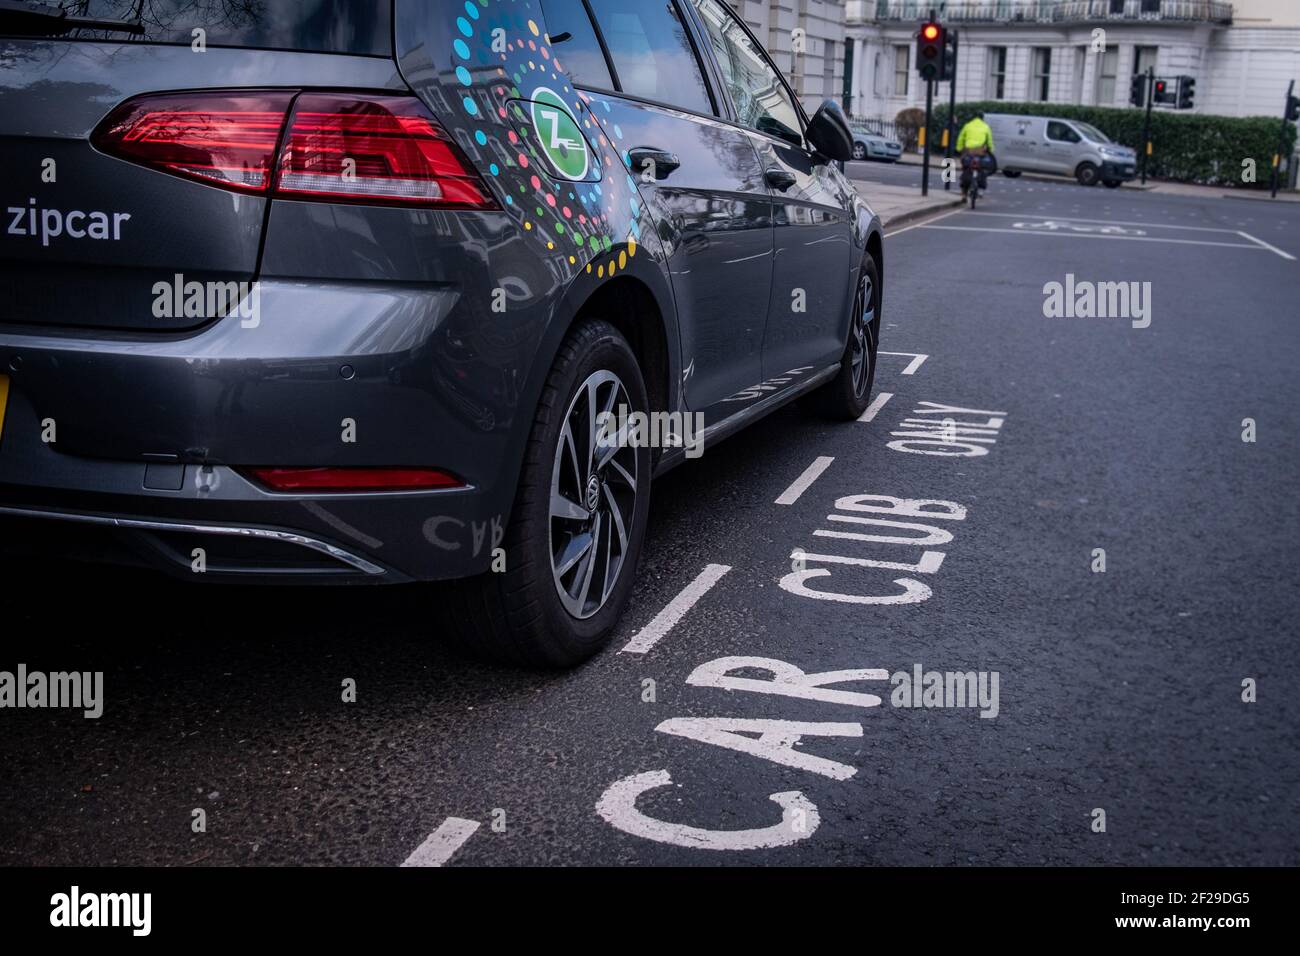 London- March 2021: Zipcar car parking on street in Notting Hill- a car-sharing company and a subsidiary of Avis Budget Group Stock Photo